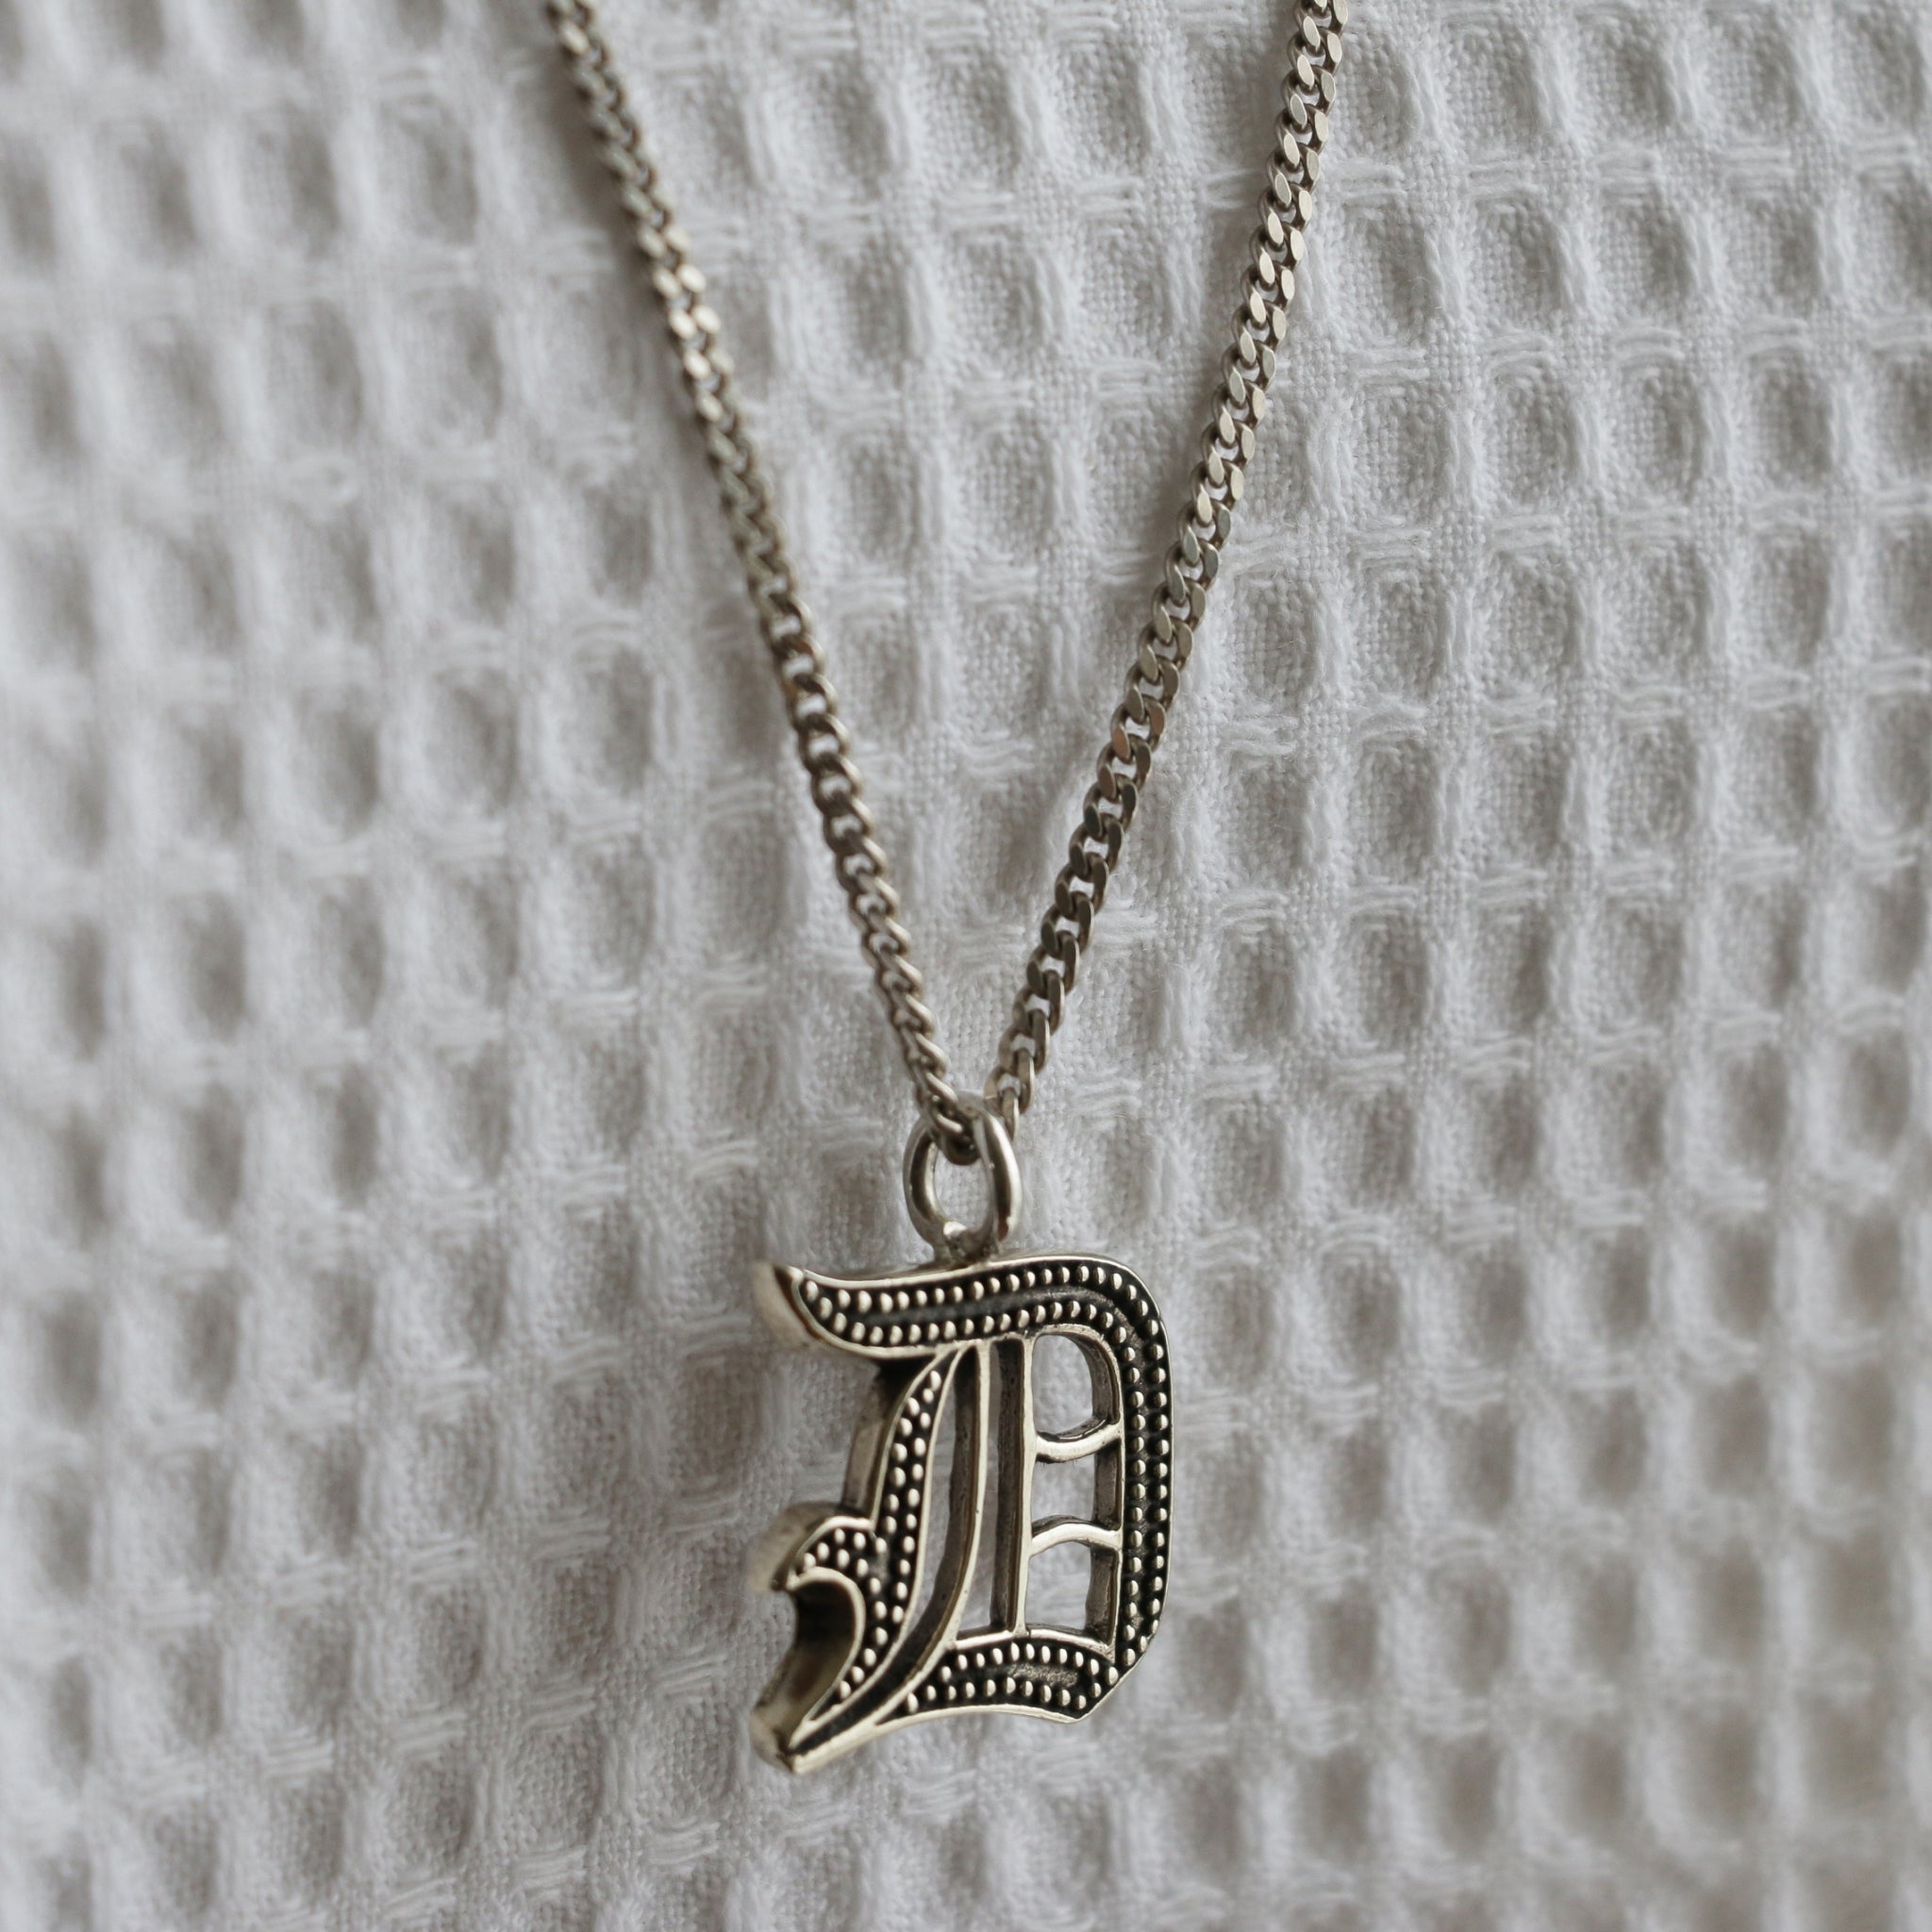 D gothic Letters pendant necklace sterling silver 925 Biker old englis –  Jack's Club